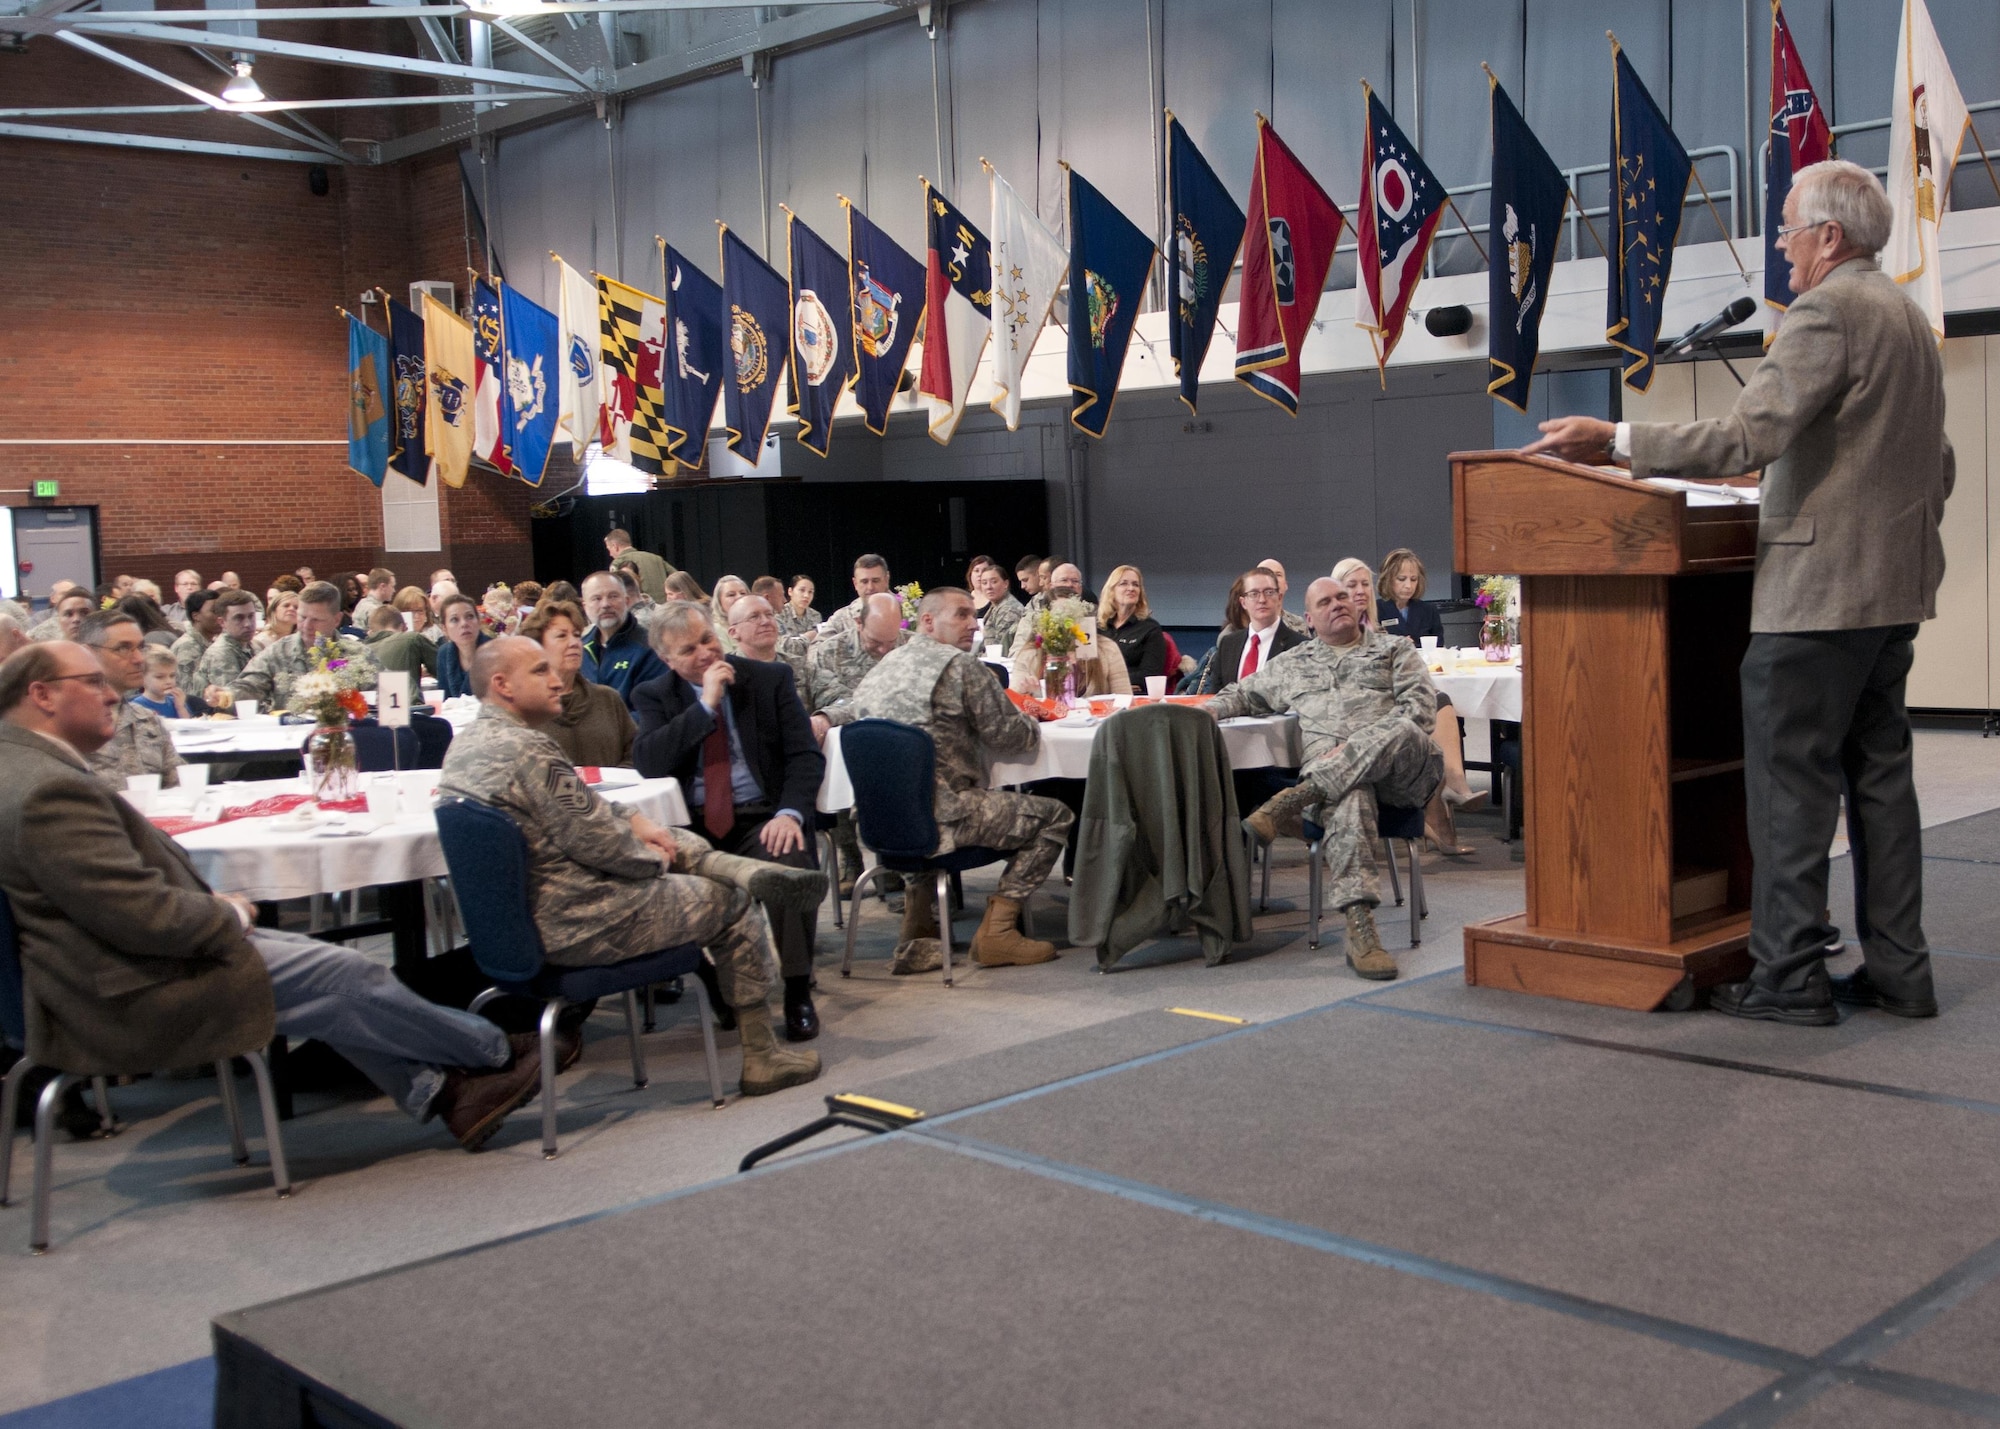 Retired Brig. Gen. Charles Duke Jr. speaks to people from the Warren community and guests from the local community, who attended this year’s Prayer luncheon, Feb. 4, 2015, in the Fall Hall Community Center. More than 200 people attended the annual event, which was hosted by the base chapel. (U.S. Air Force photo by Airman 1st Class Malcolm Mayfield)